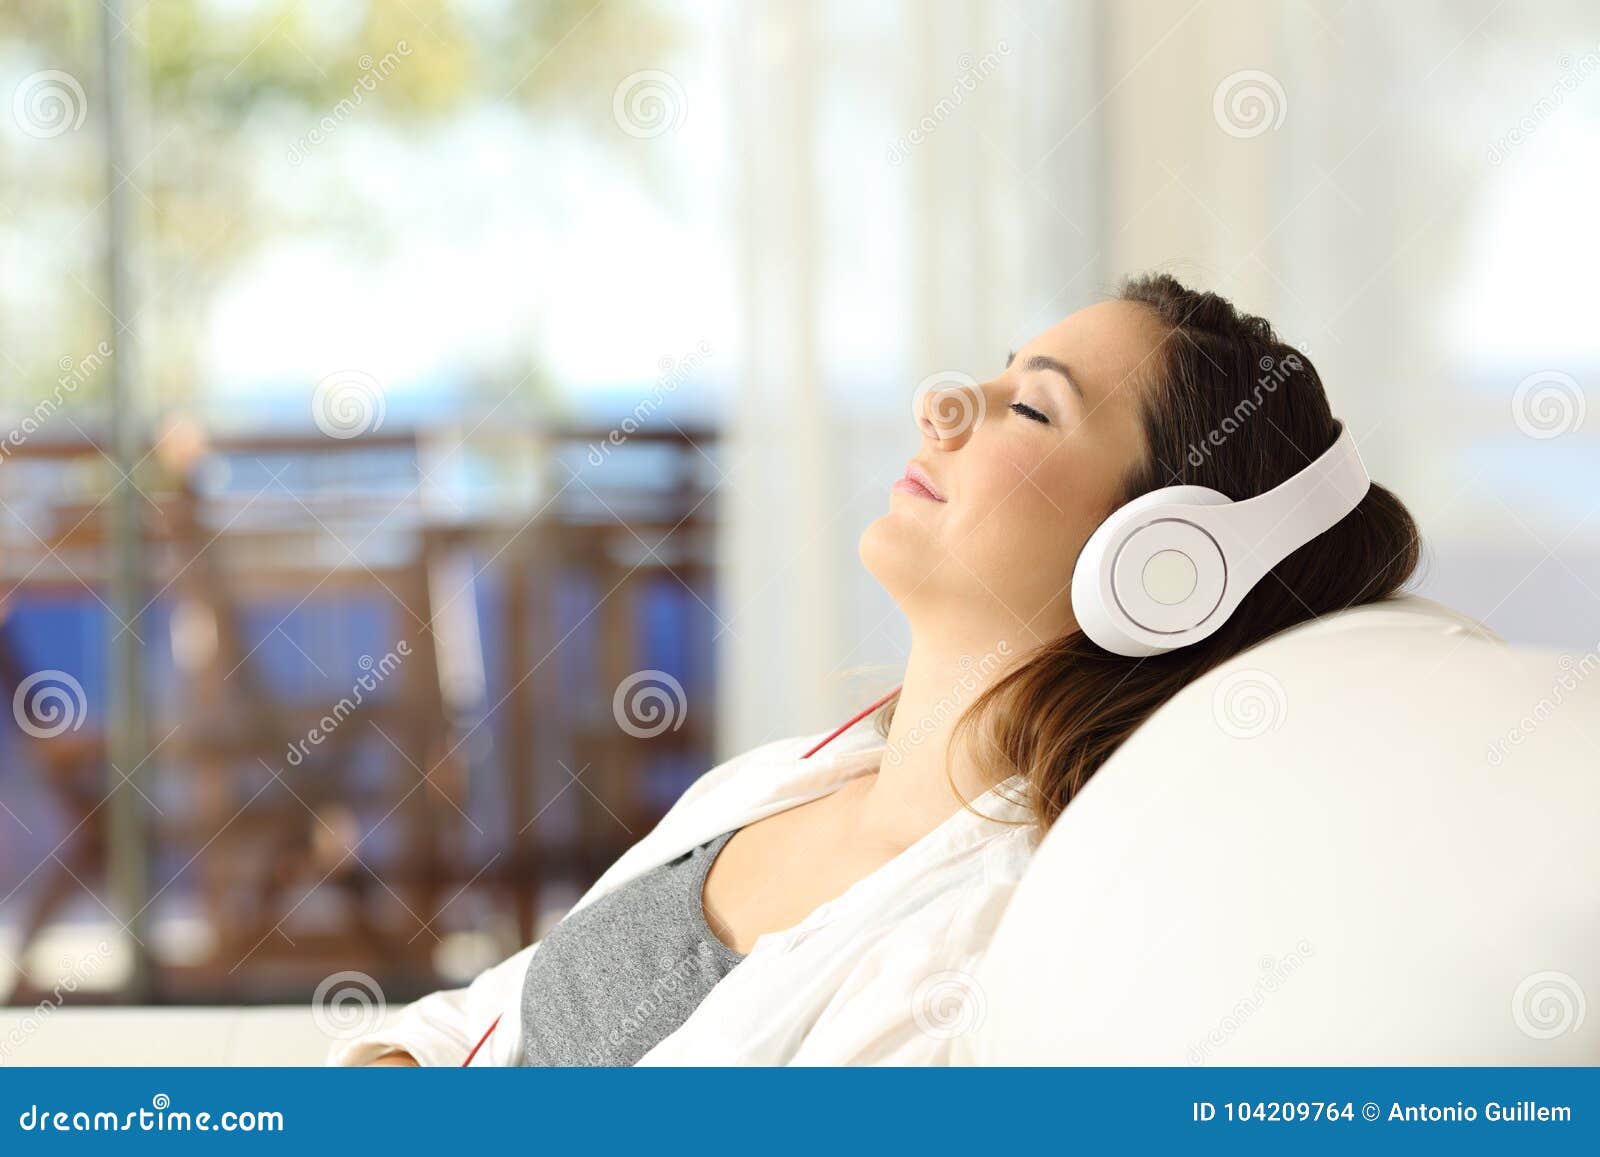 woman relaxing listening to music on a couch